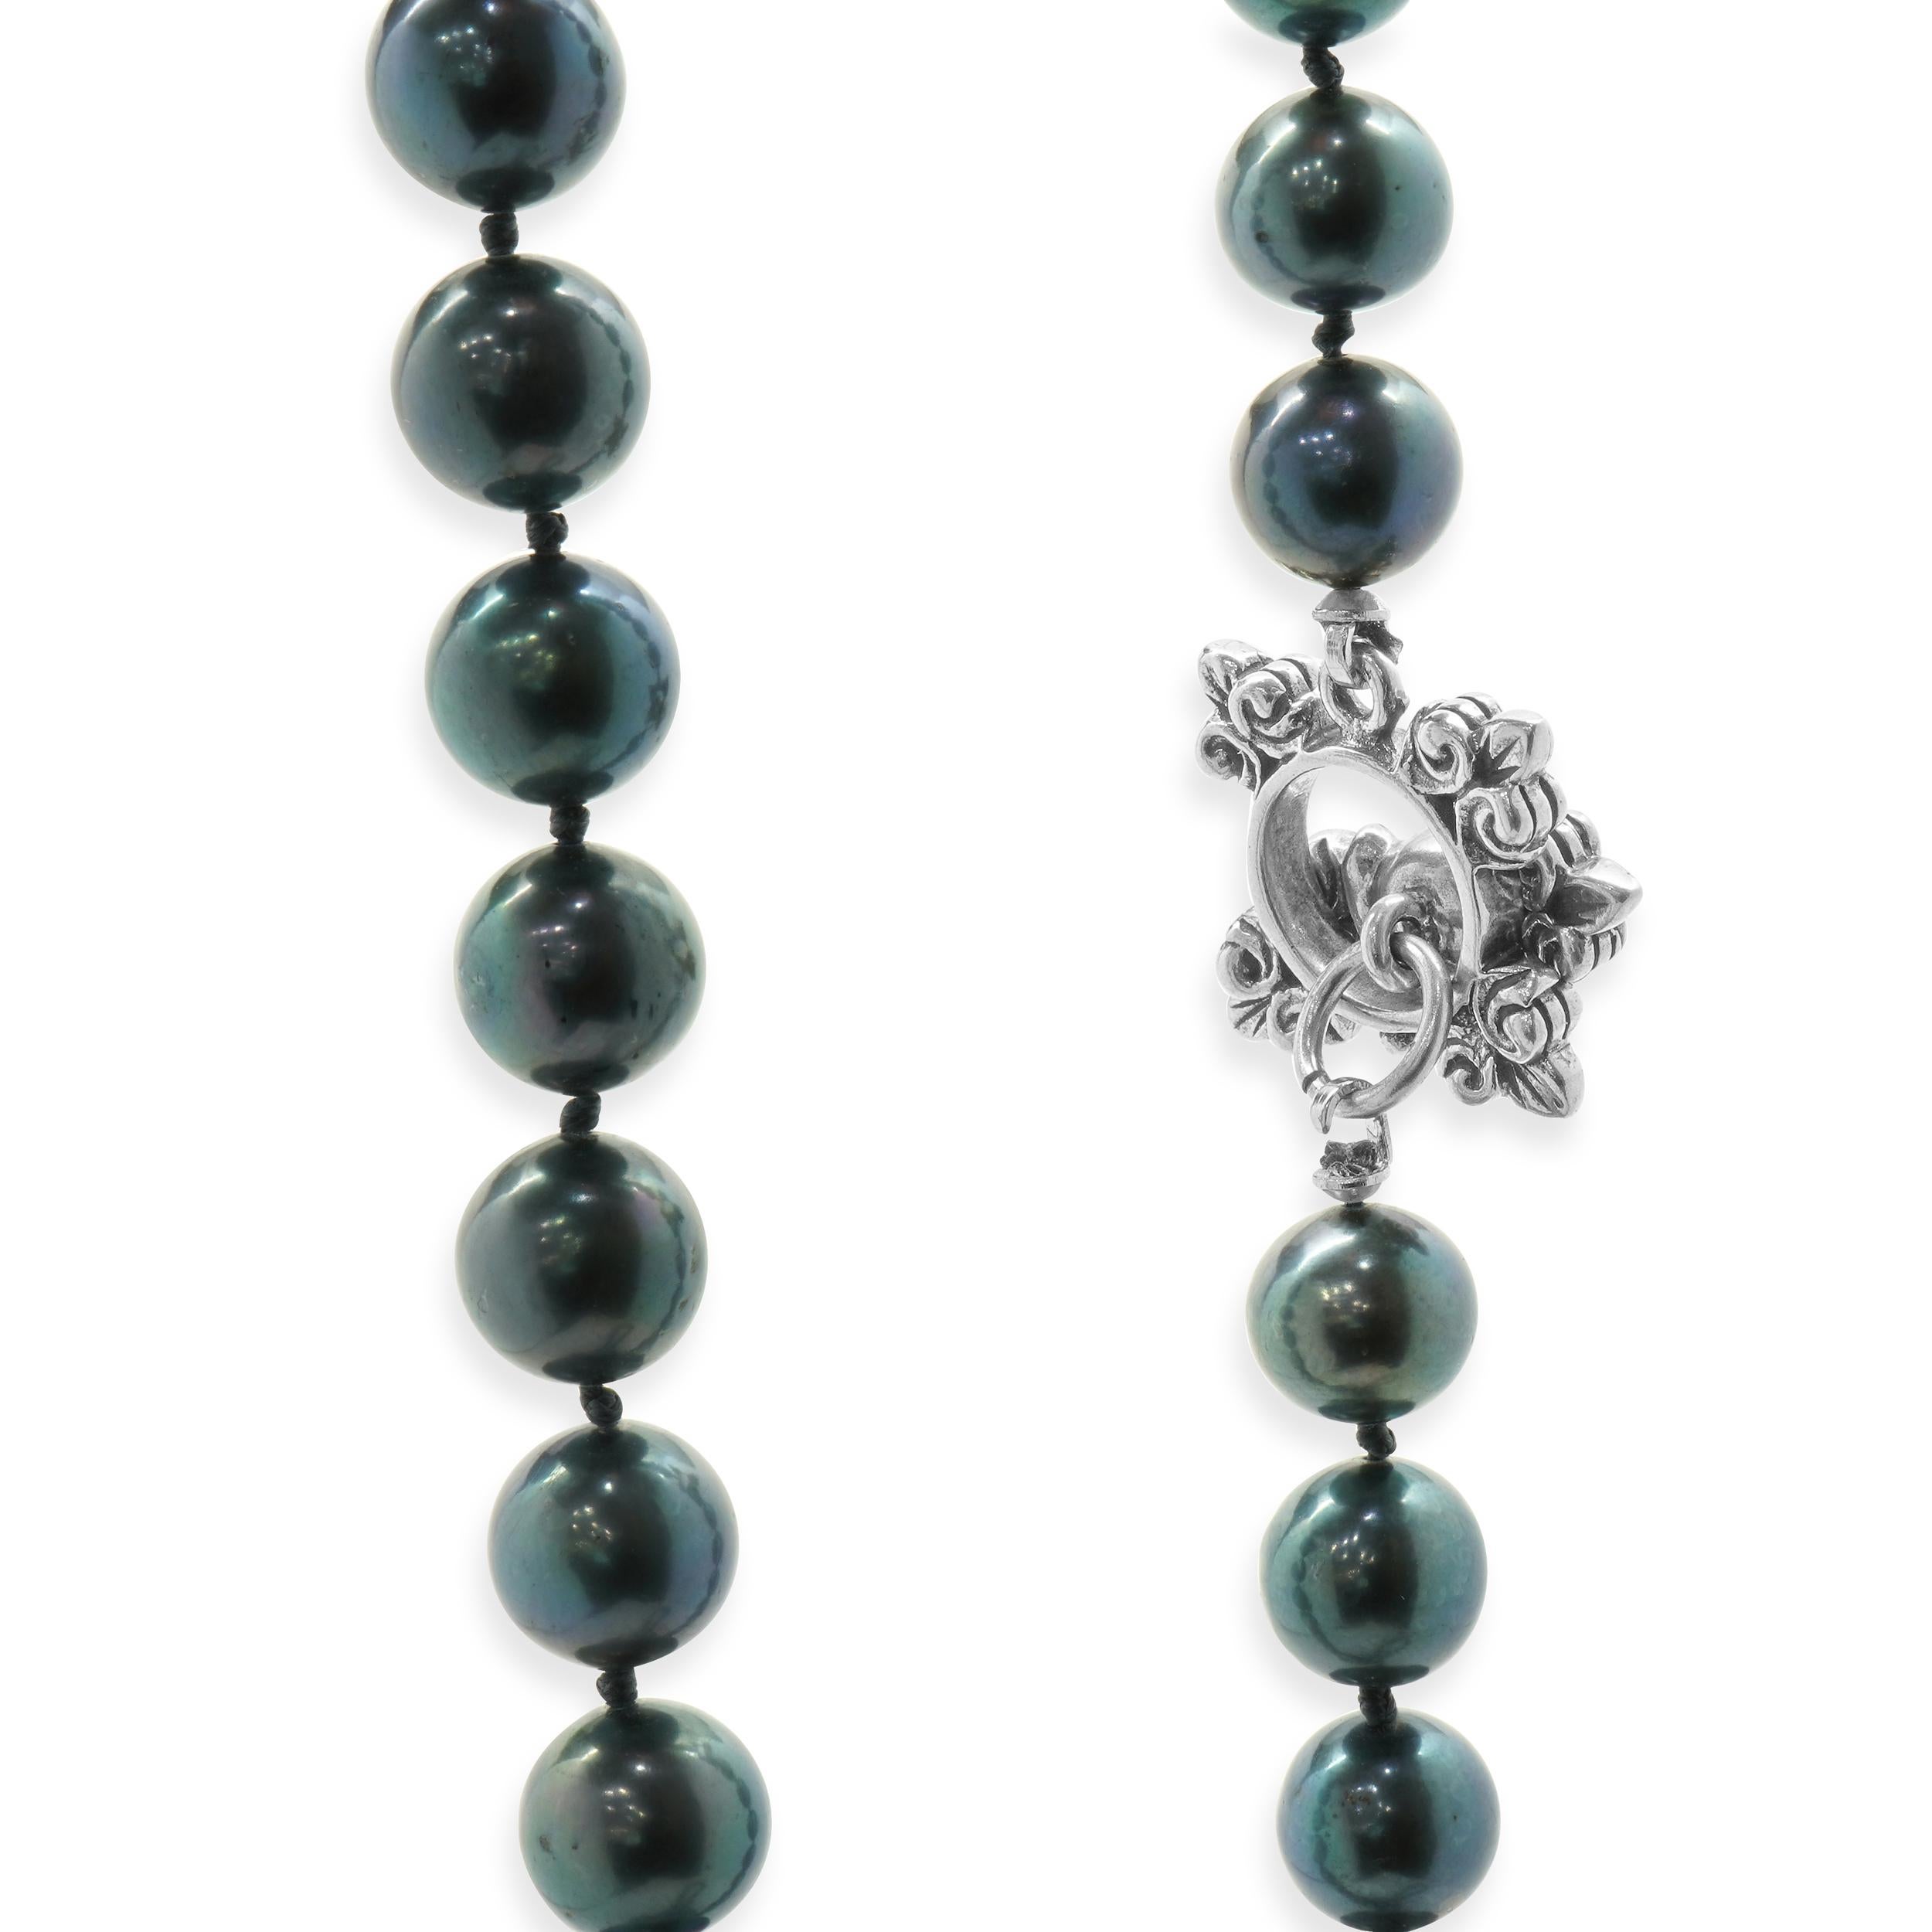 Round Cut Black Pearl Opera Length Necklace with Sterling Silver Clasp